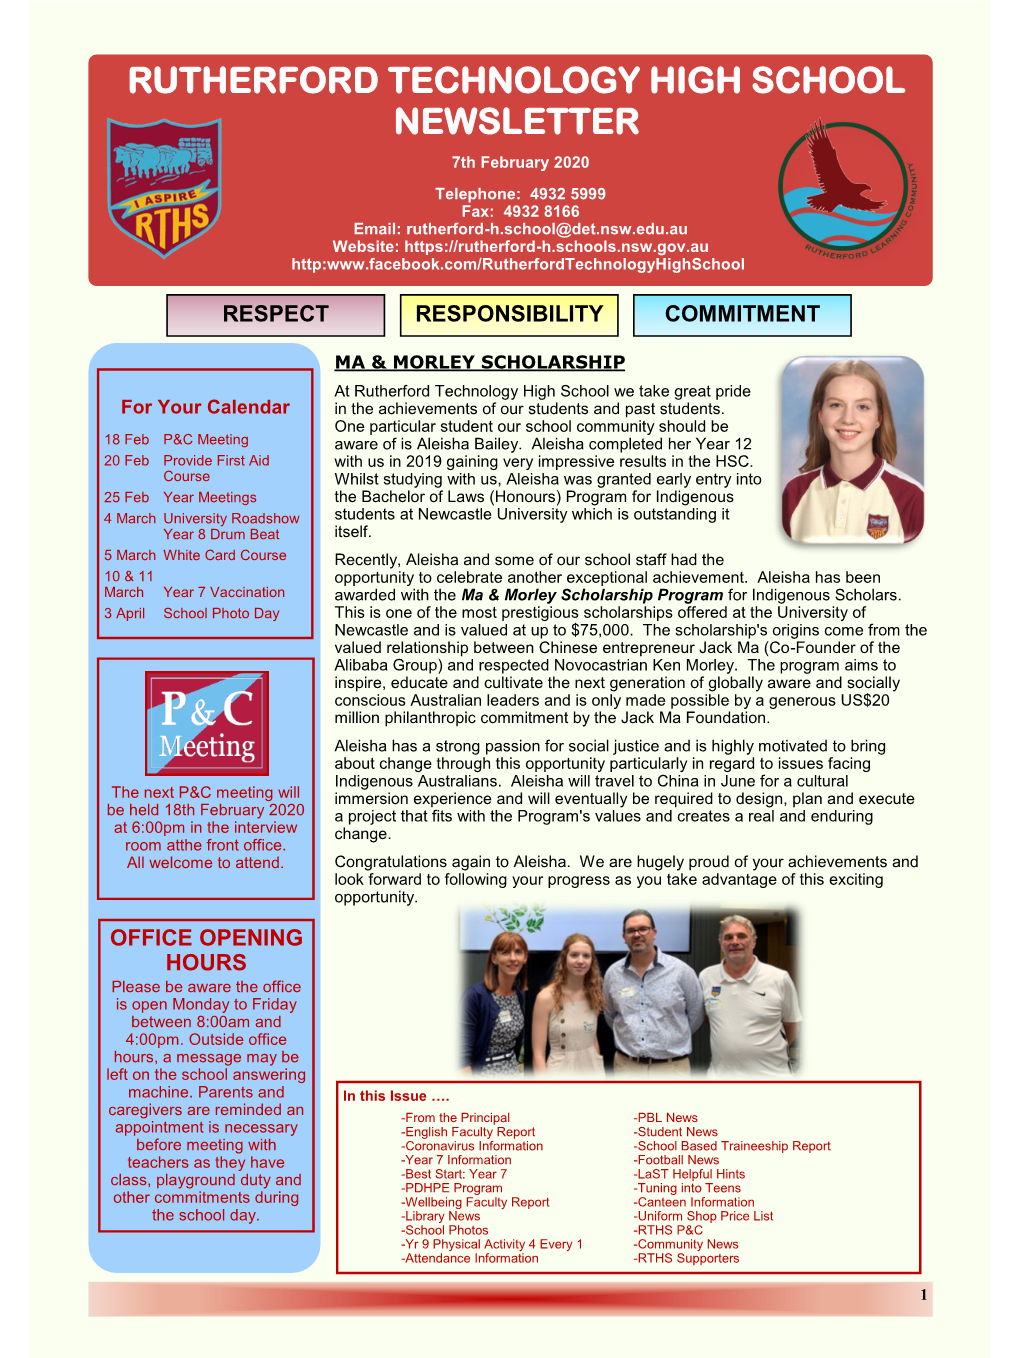 RUTHERFORD TECHNOLOGY HIGH SCHOOL NEWSLETTER 7Th February 2020